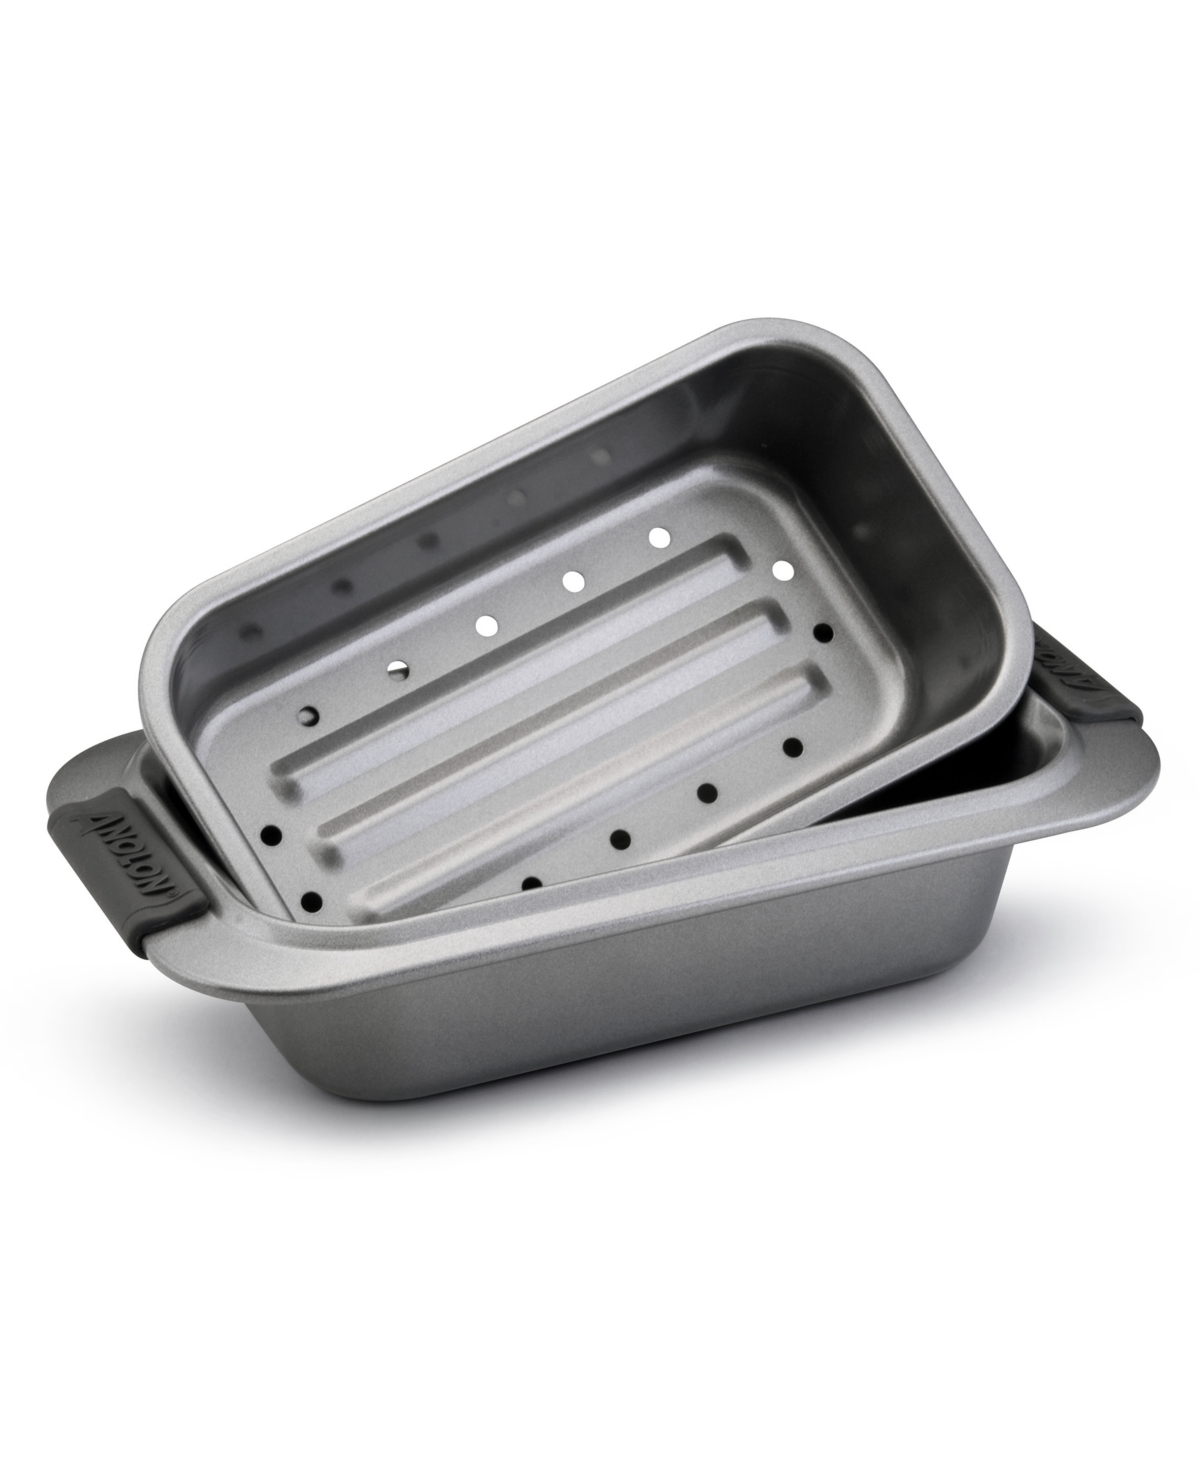 415845 Anolon Advanced 9 x 5 Loaf Pan with Drip Pan Inser sku 415845